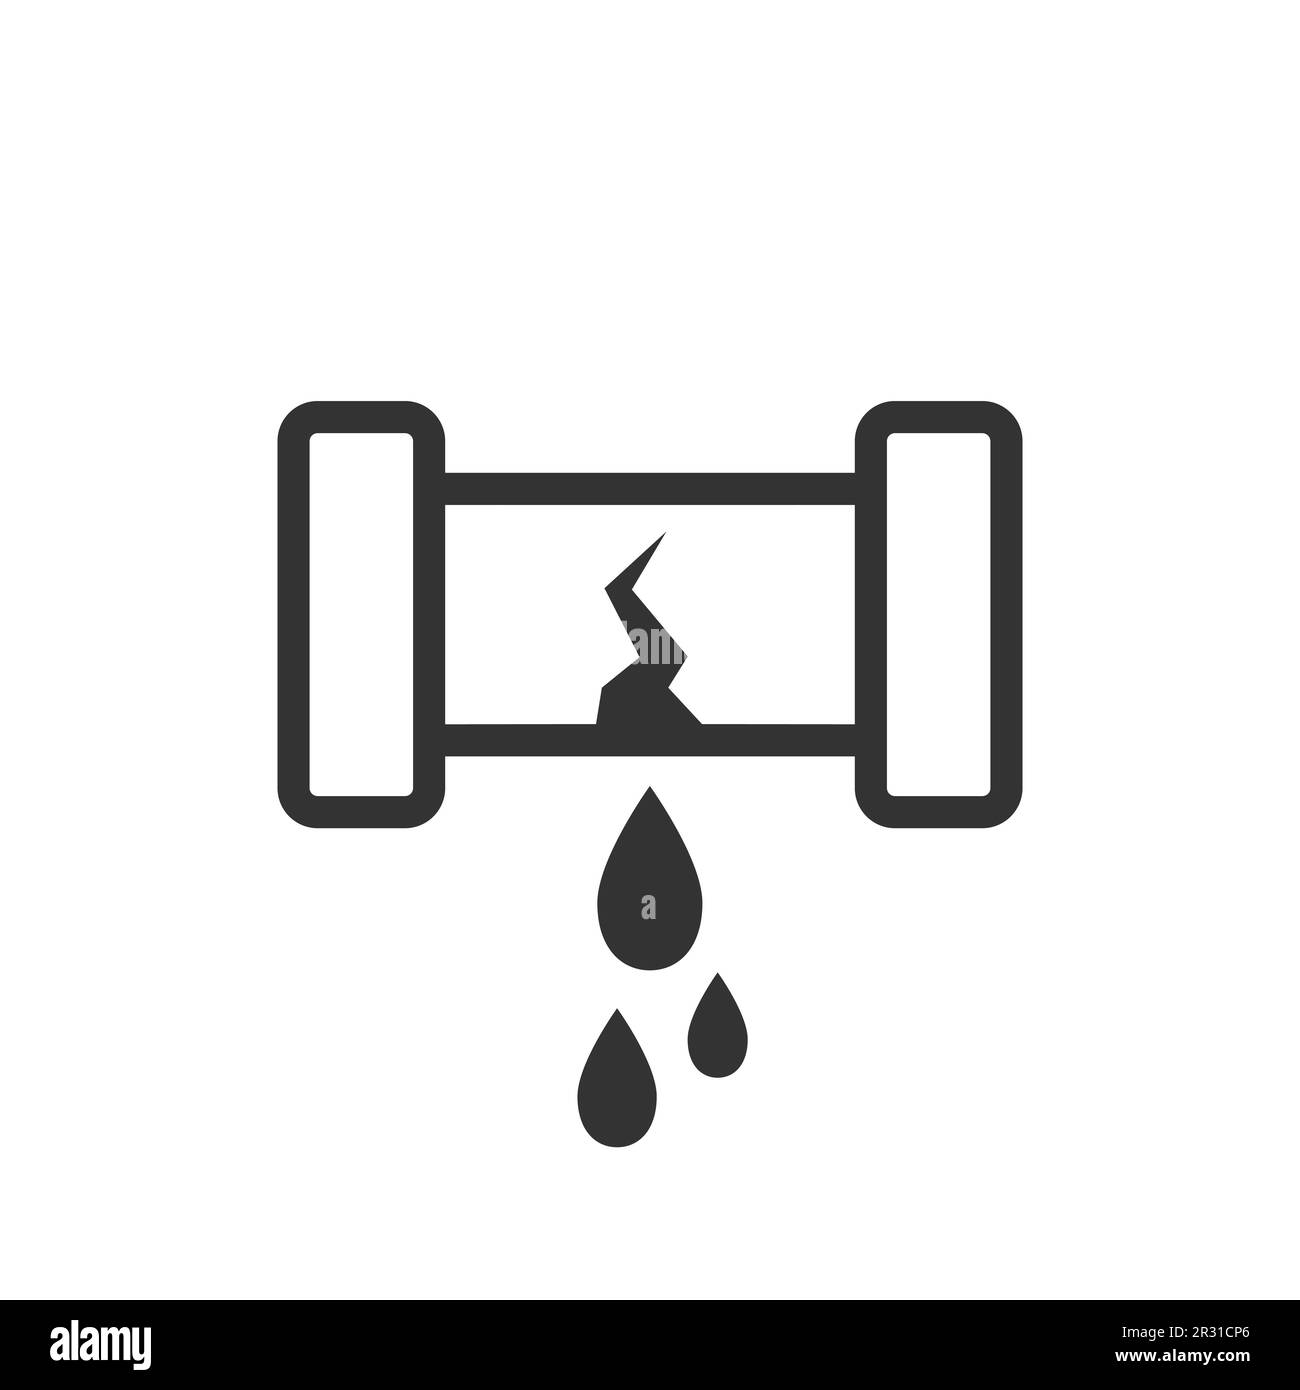 A water pipe burst. Damage to the water supply. Fluid leak. Plumber icon. Vector icon. Stock Vector